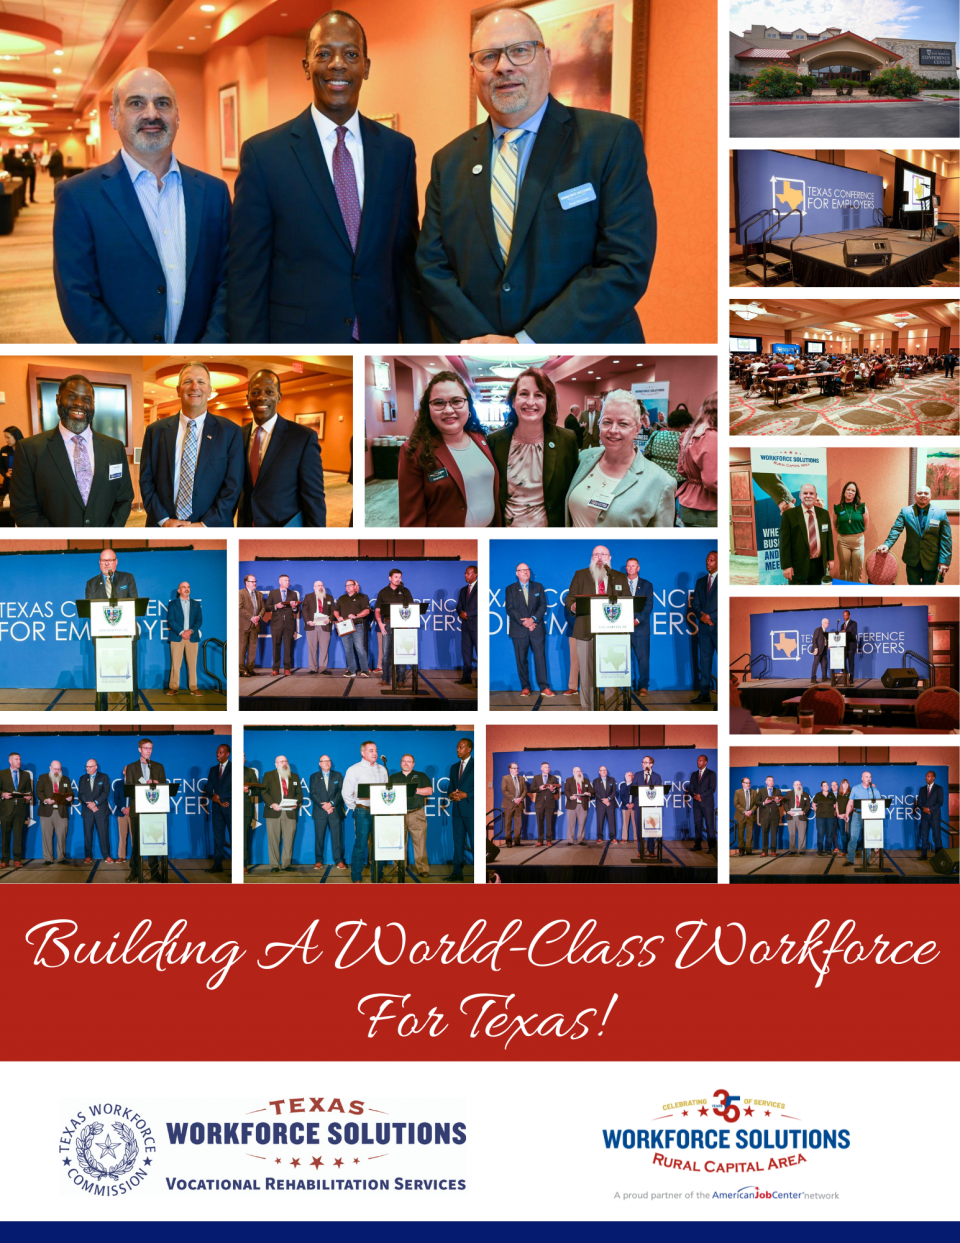 WSRCA Team Helps Welcome the Texas Conference for Employers to San Marcos